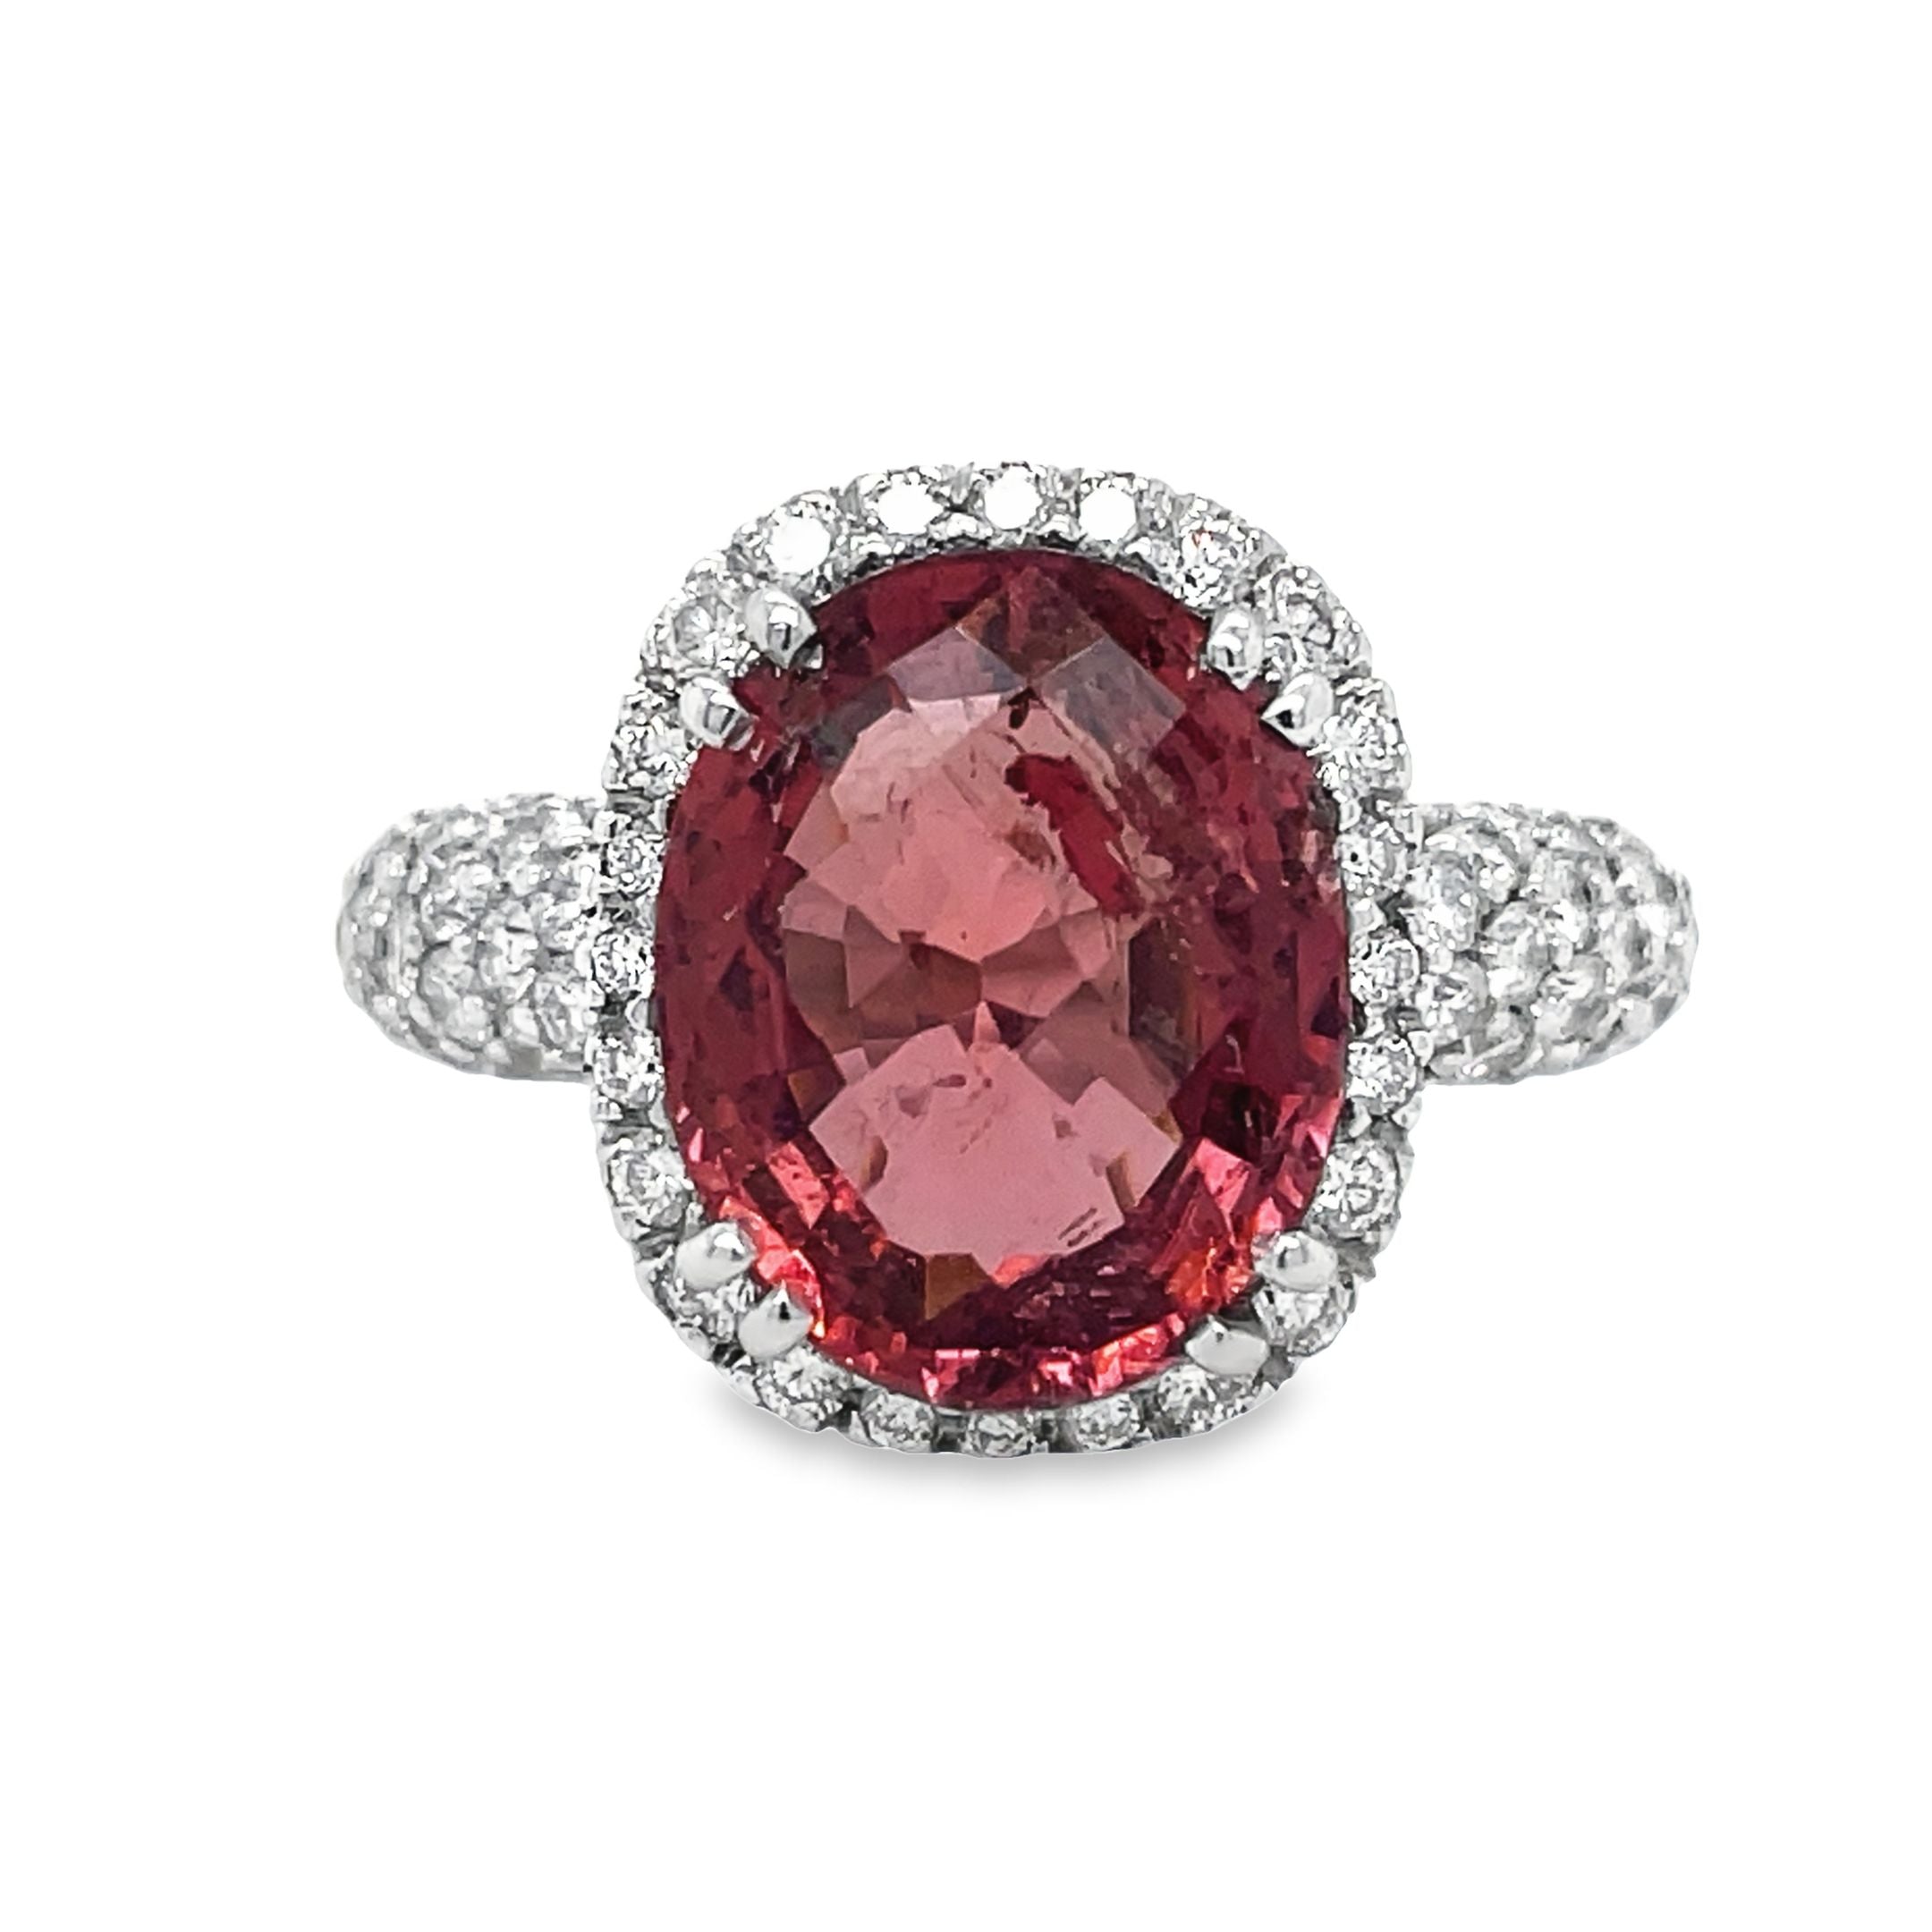 Expertly crafted with a 4.47 carat oval tourmaline and 1.15 carats of diamond pave set in 18k white gold, this ring exudes elegance and luxury. Add a pop of color and sparkle to any outfit with this one-of-a-kind piece.